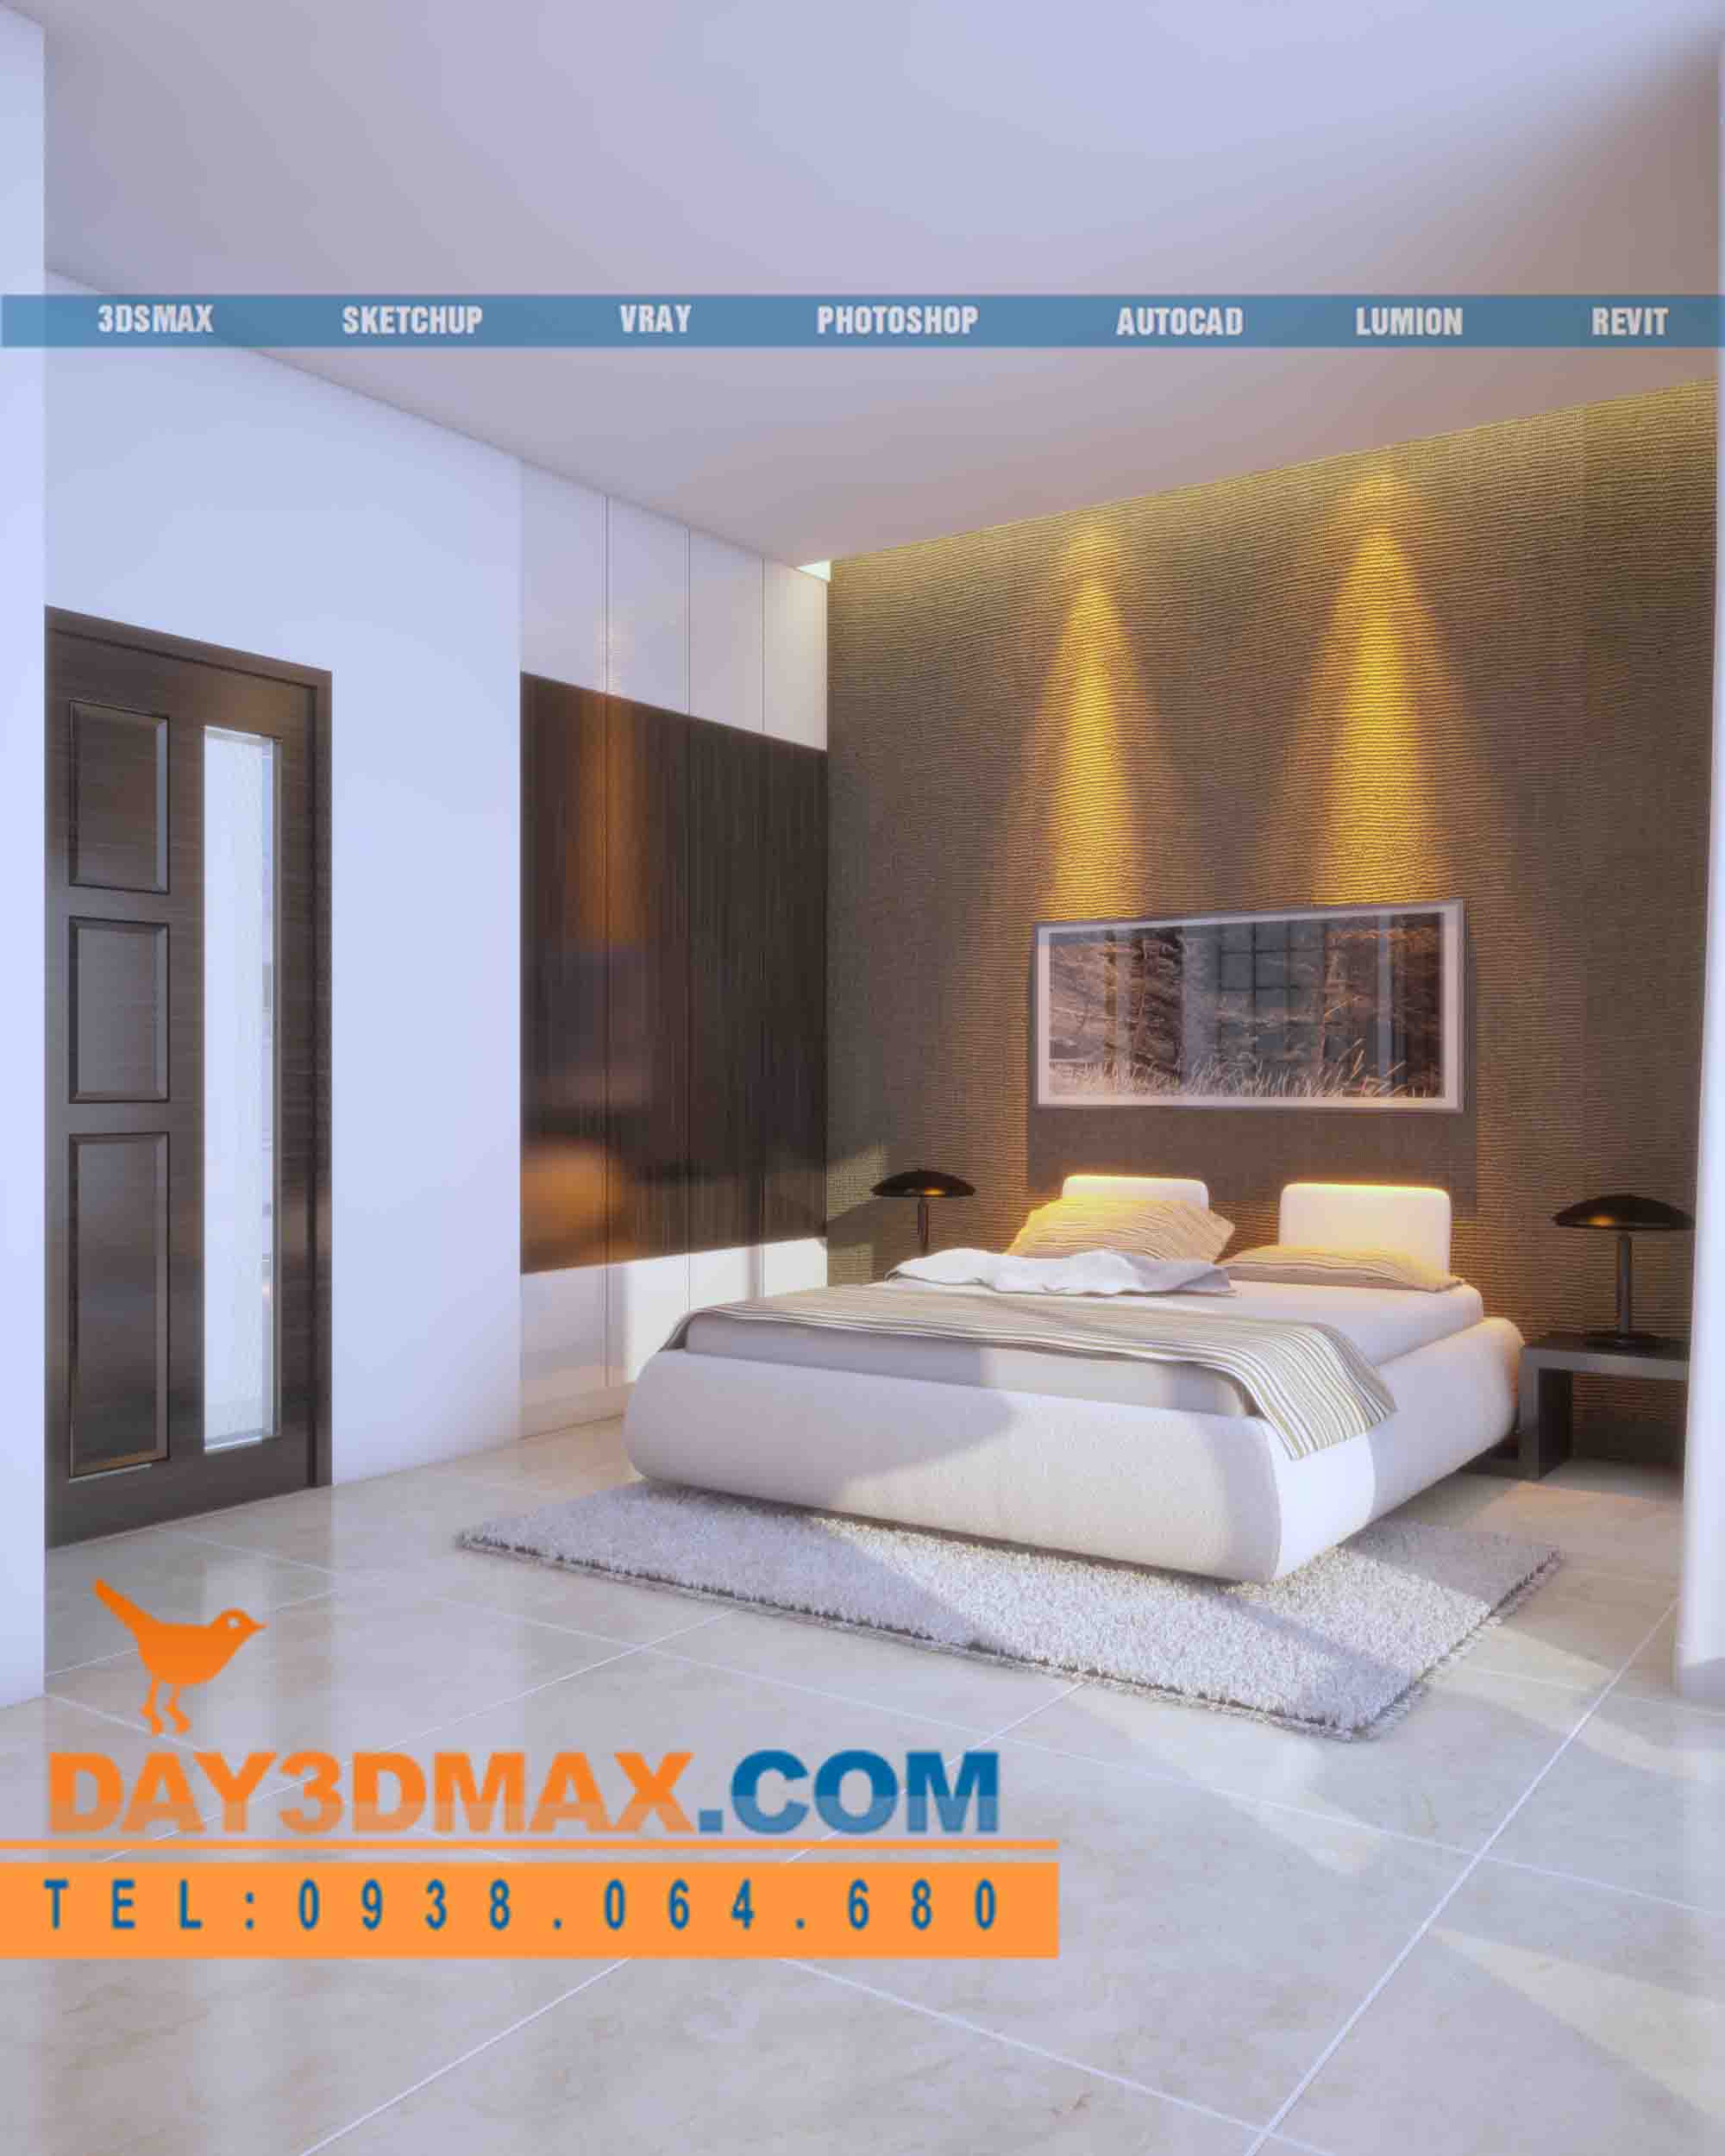 Online 3d Course Render An Interior Of A Bedroom With Vray 3dsmax